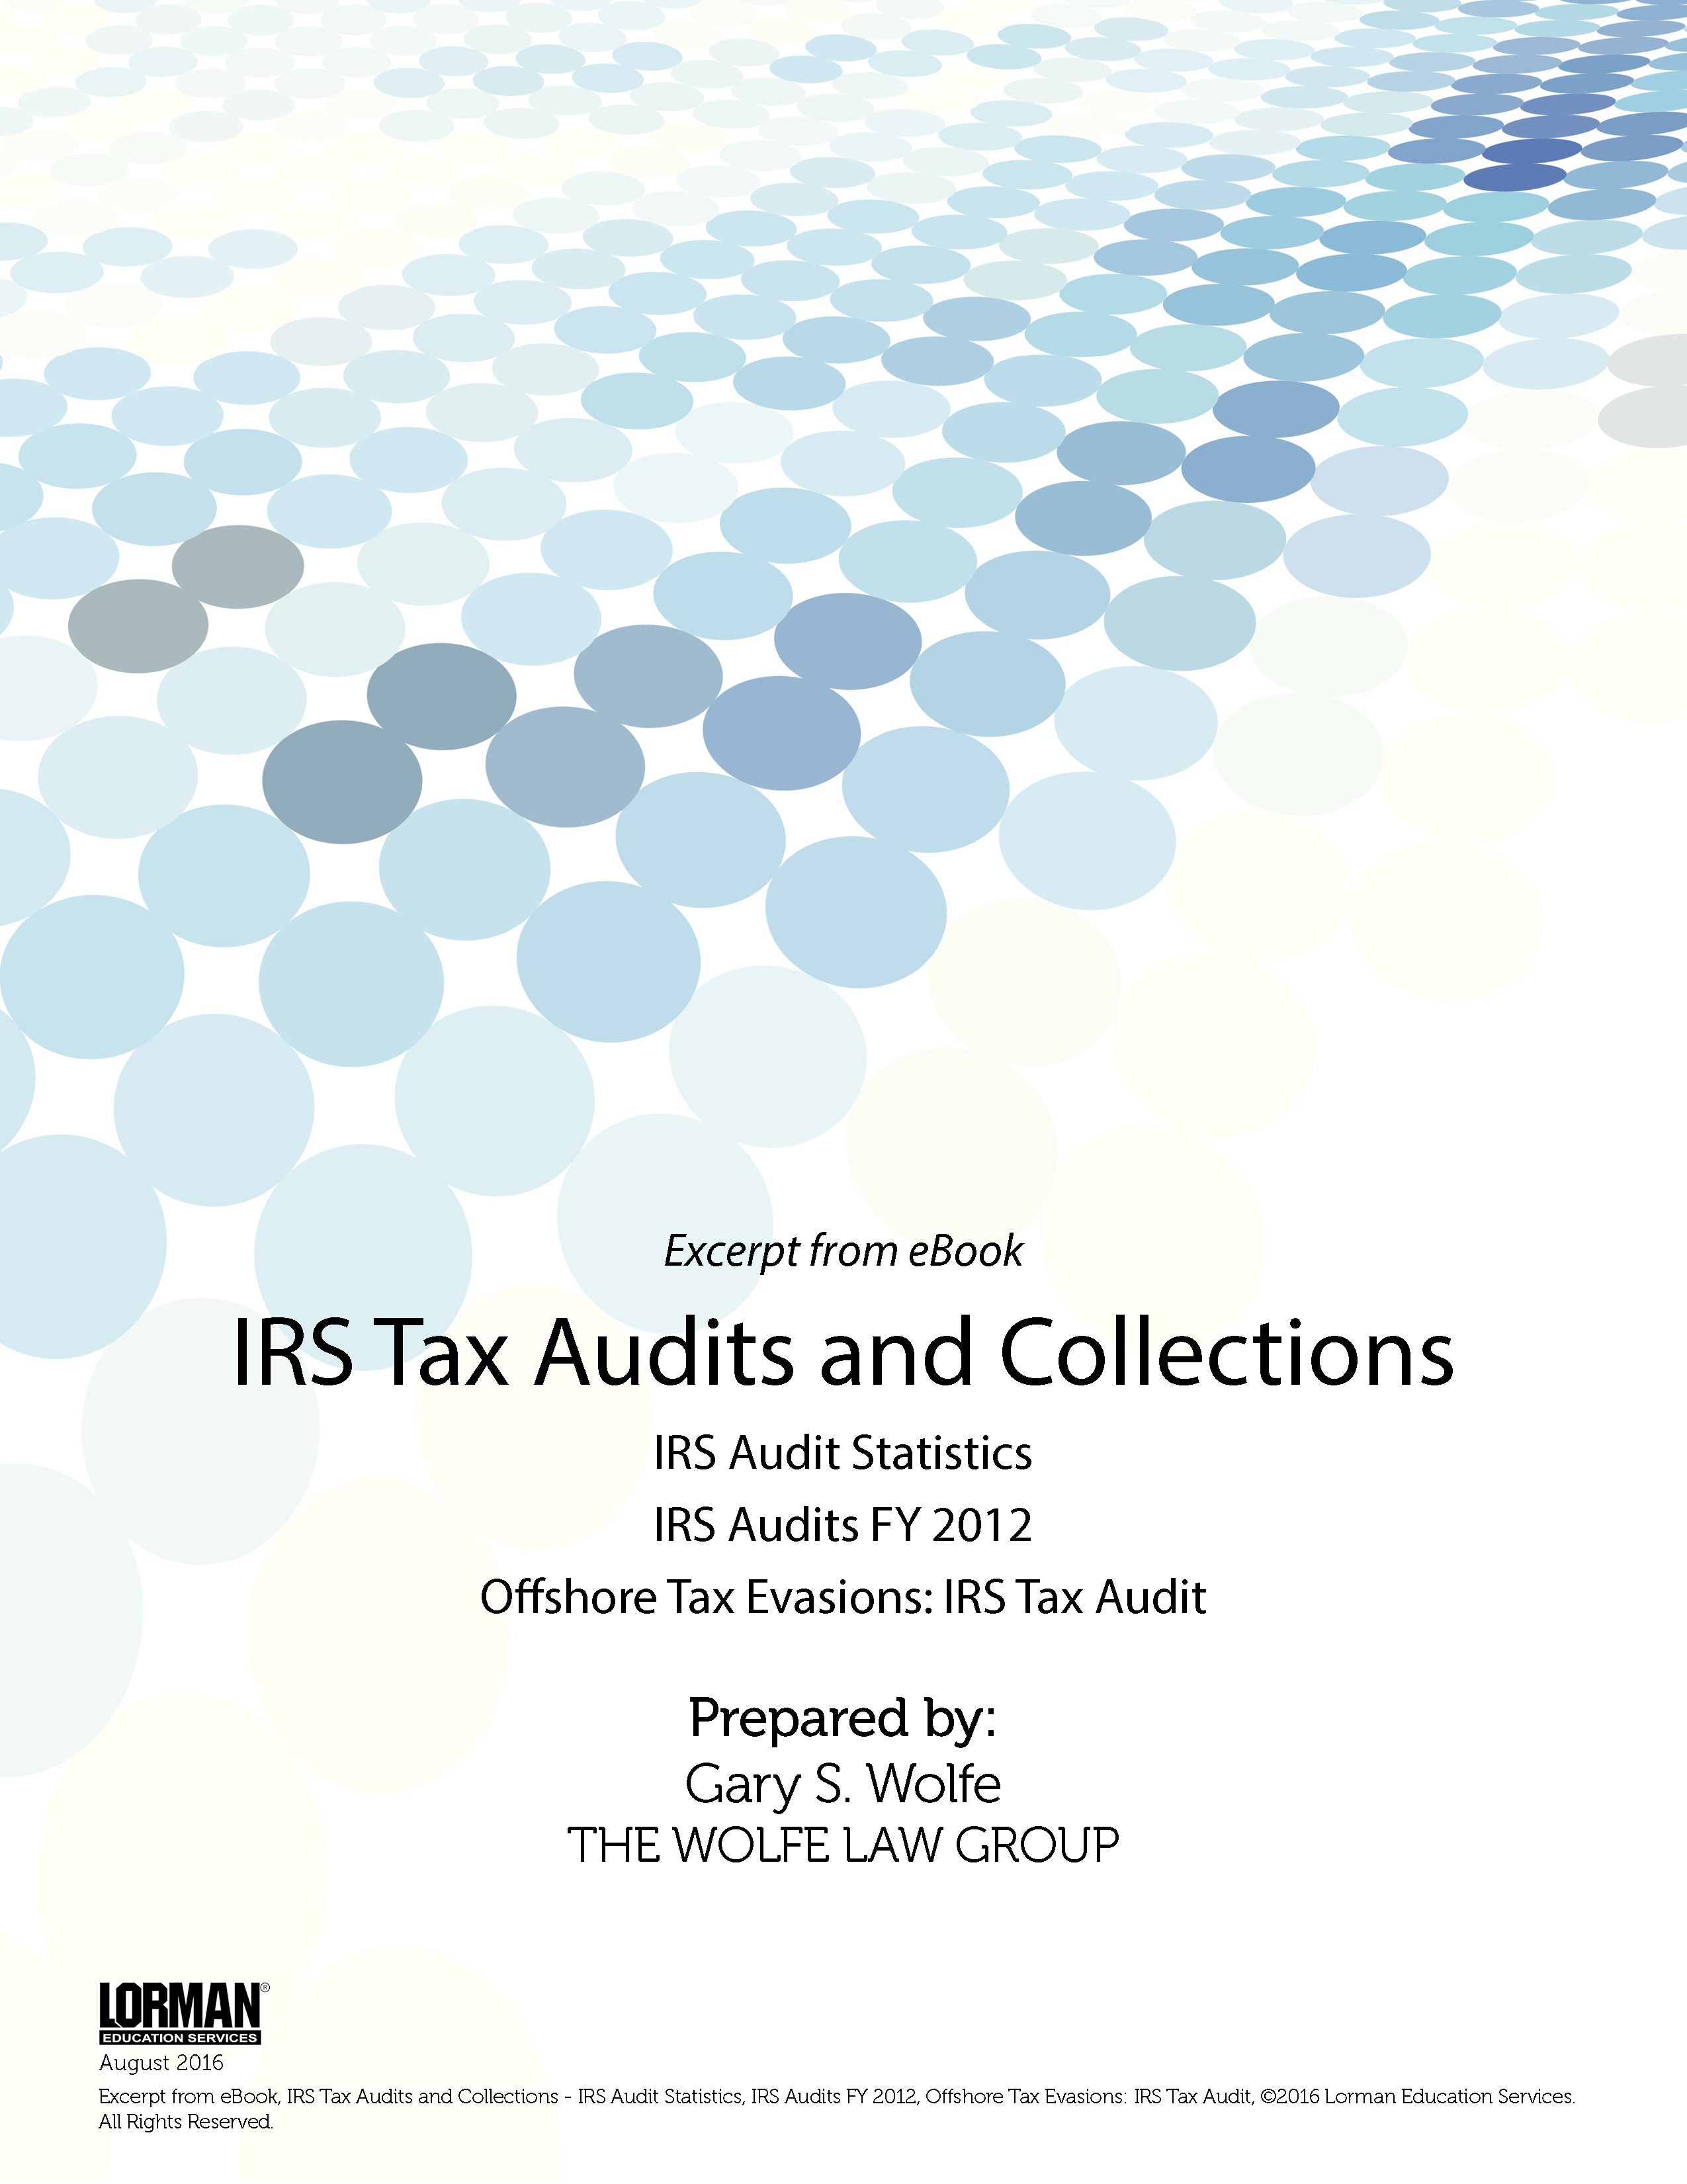 IRS Tax Audits and Collections